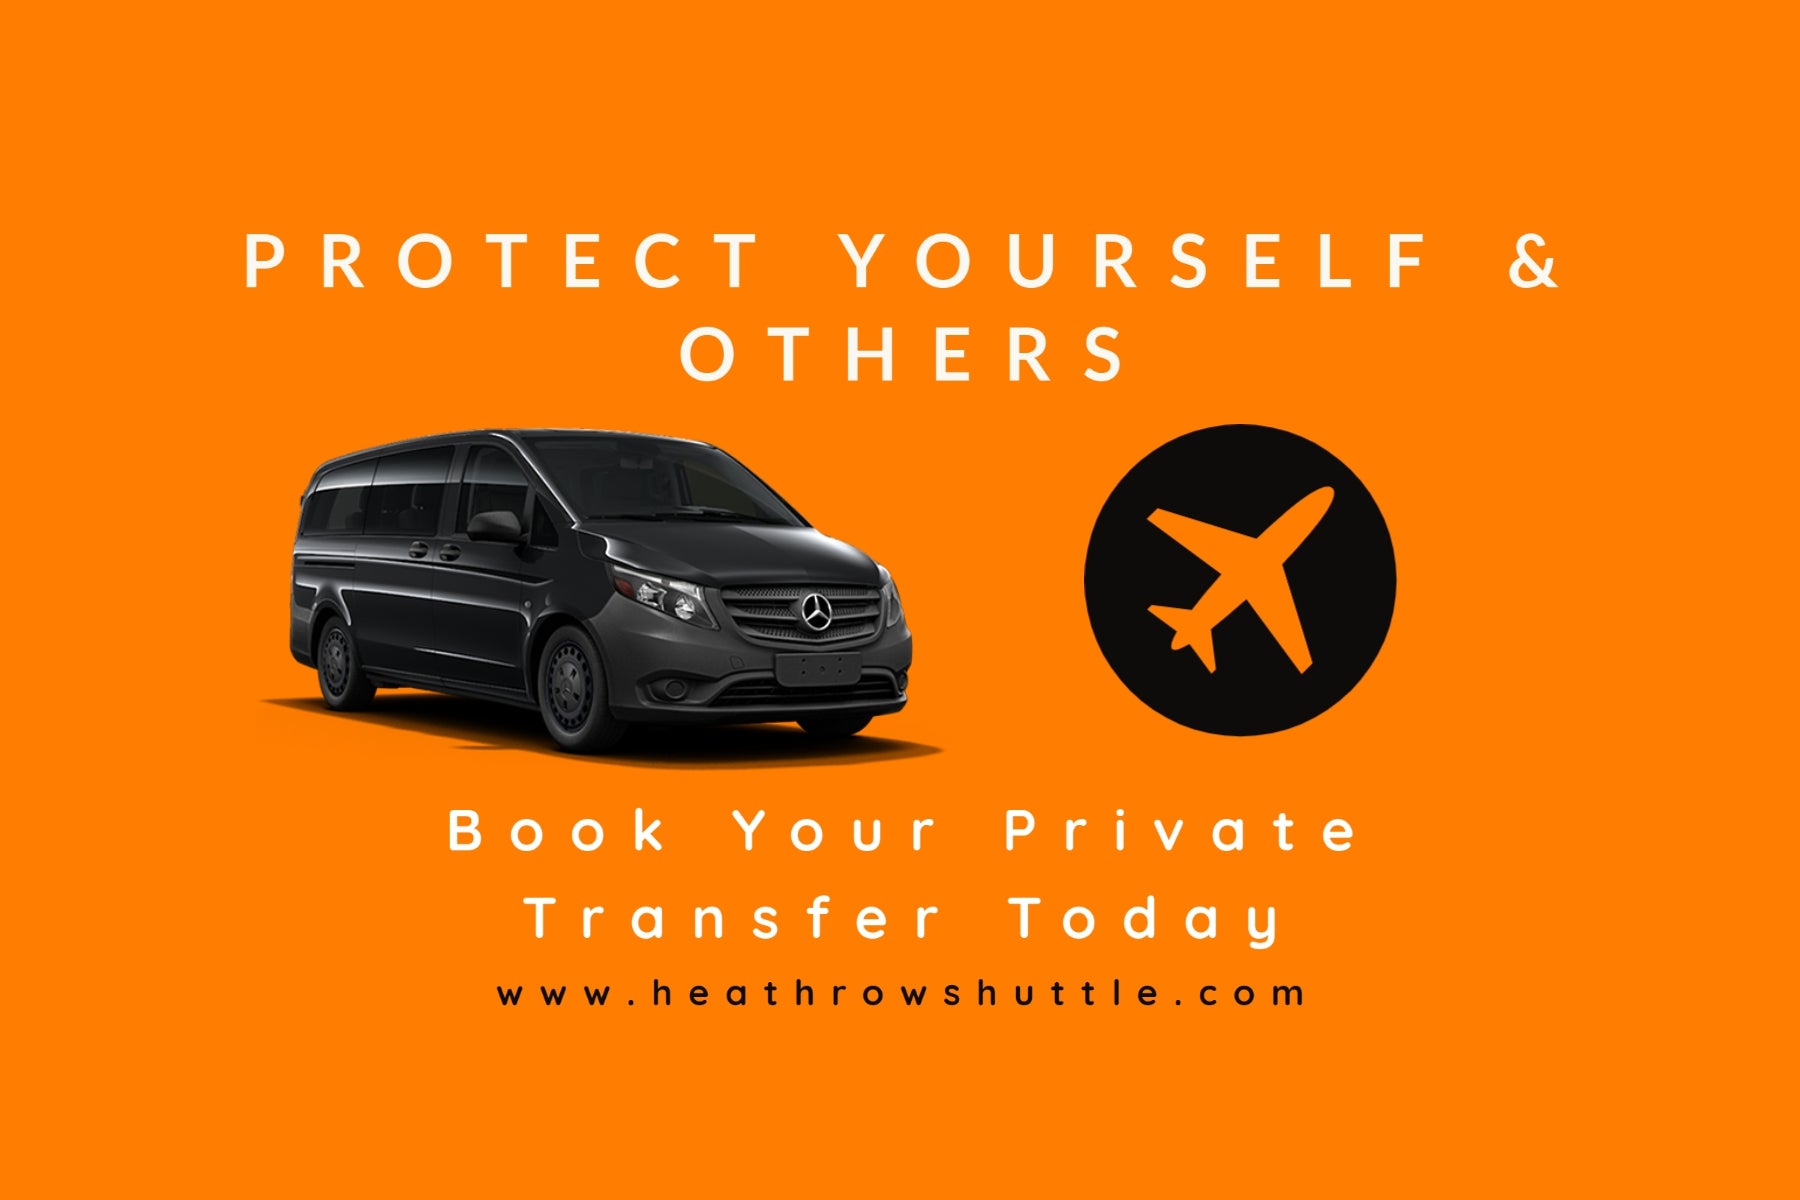 airport-transfers-london-city-heathrow-taxi-services